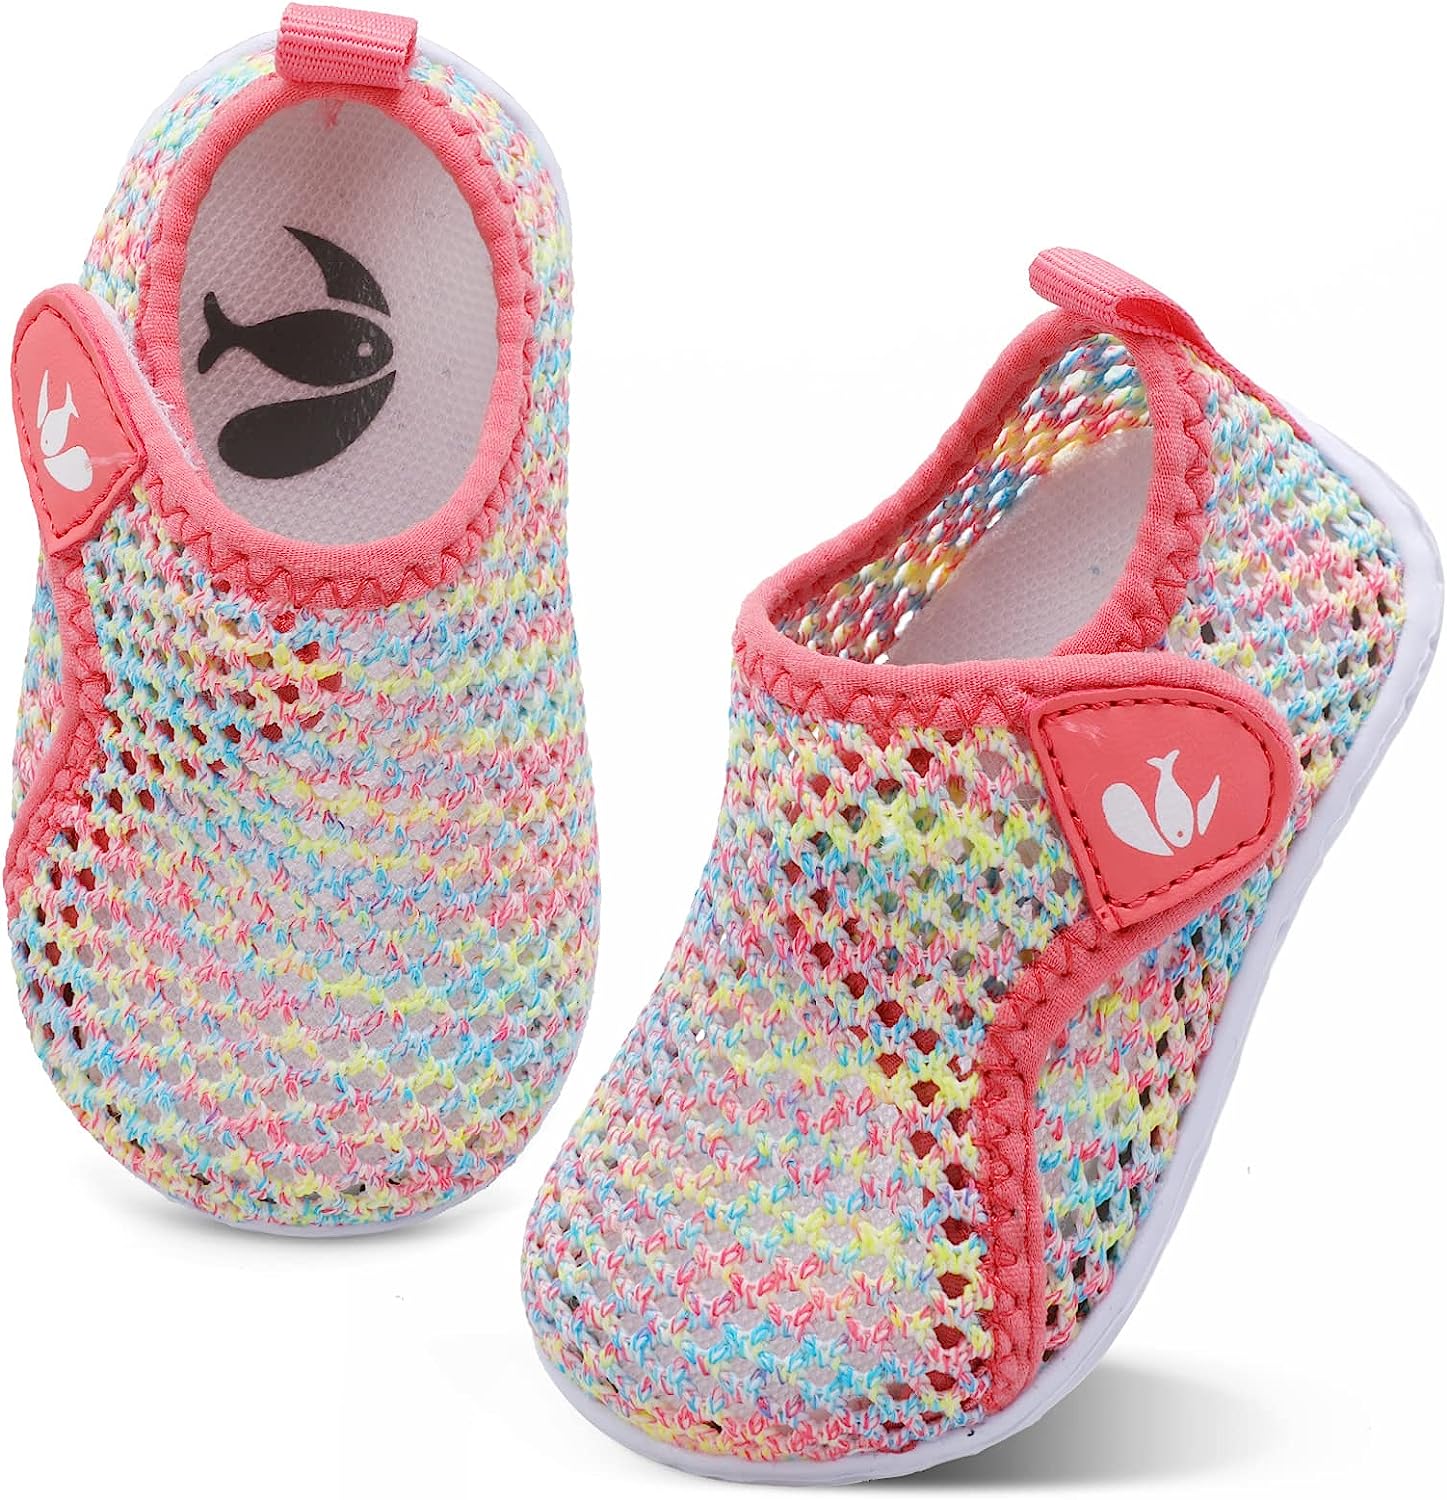 baby shoe product review